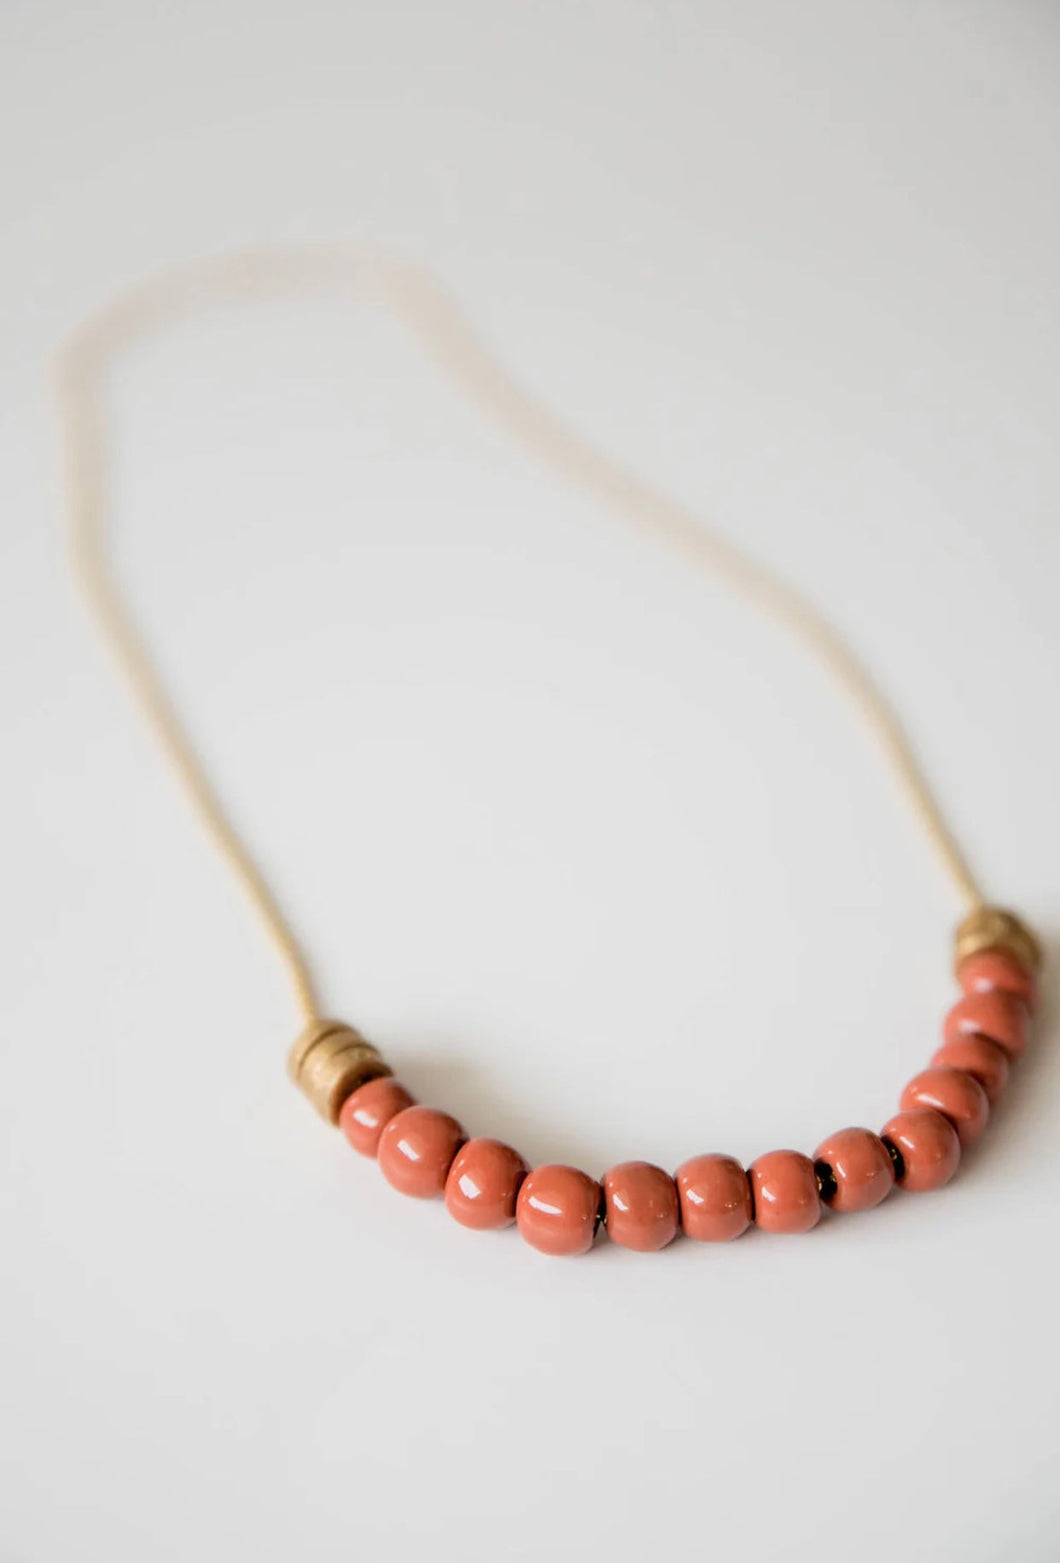 Bel Koz Single Strand Flat Bead Necklace - TOMATO - Link in description to purchase at Betsey's